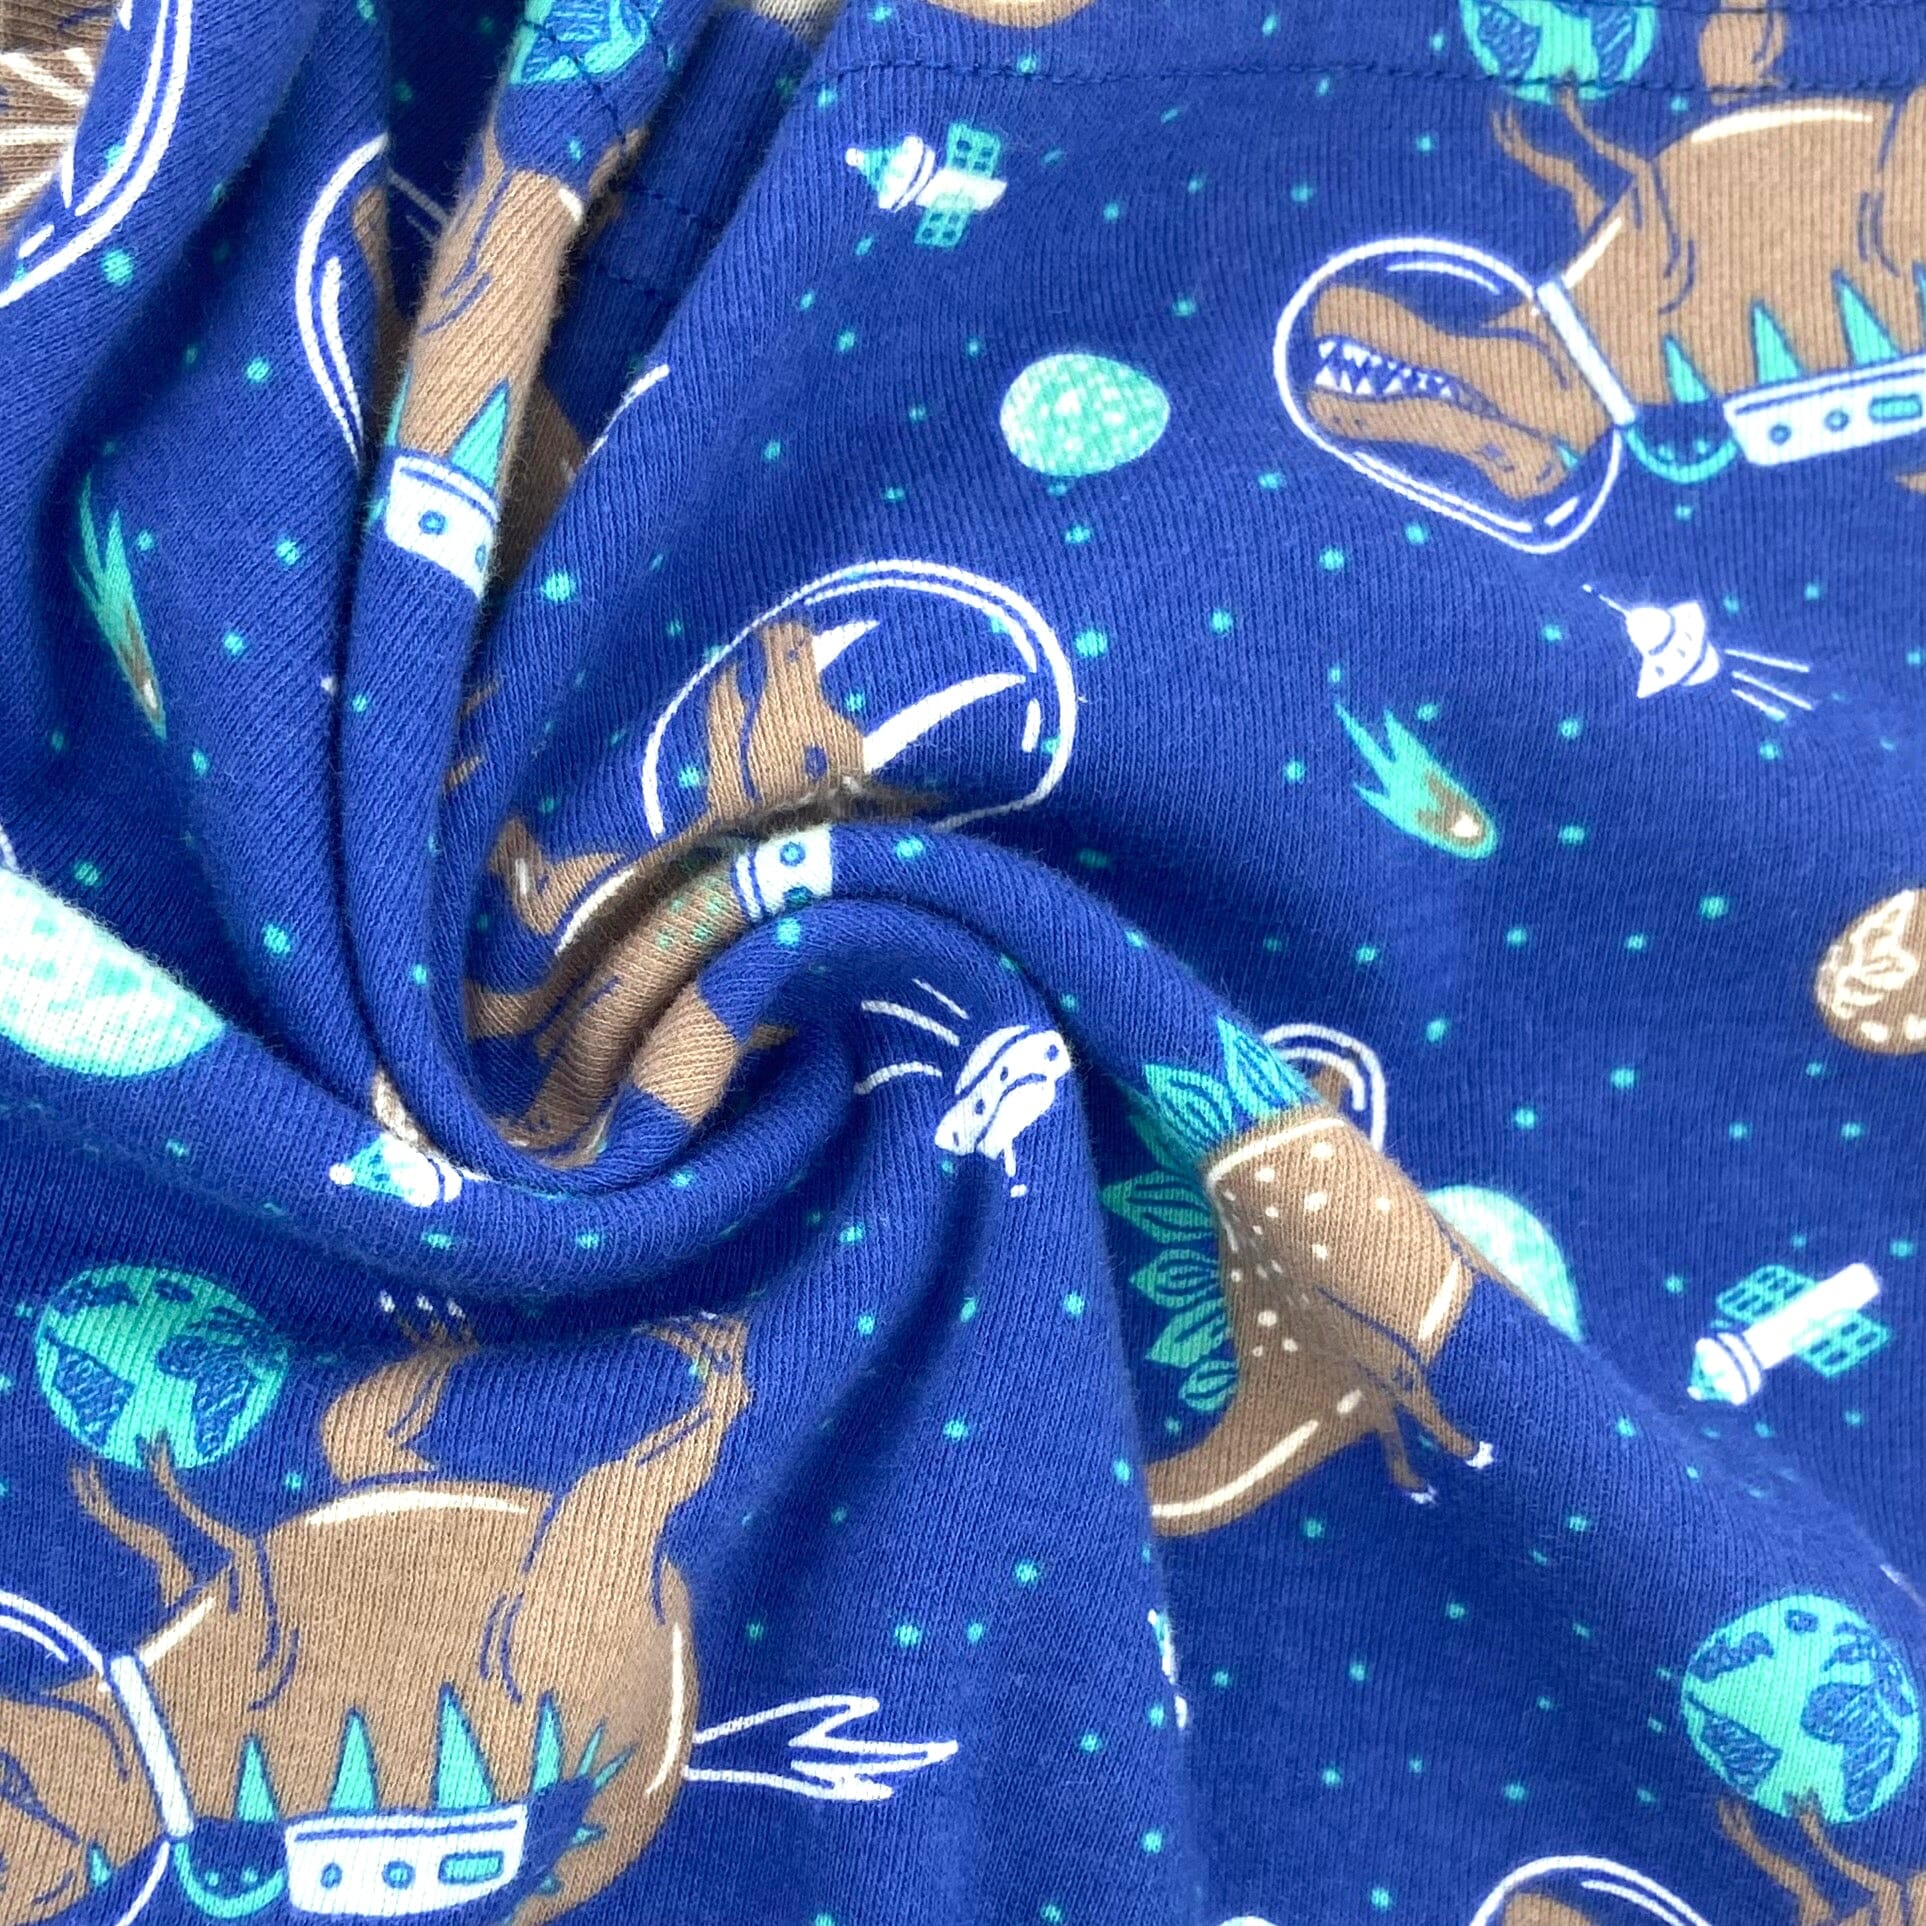 Men's Dinosaur in Outer Space All-Over Print Cotton Knit Pajama Shorts